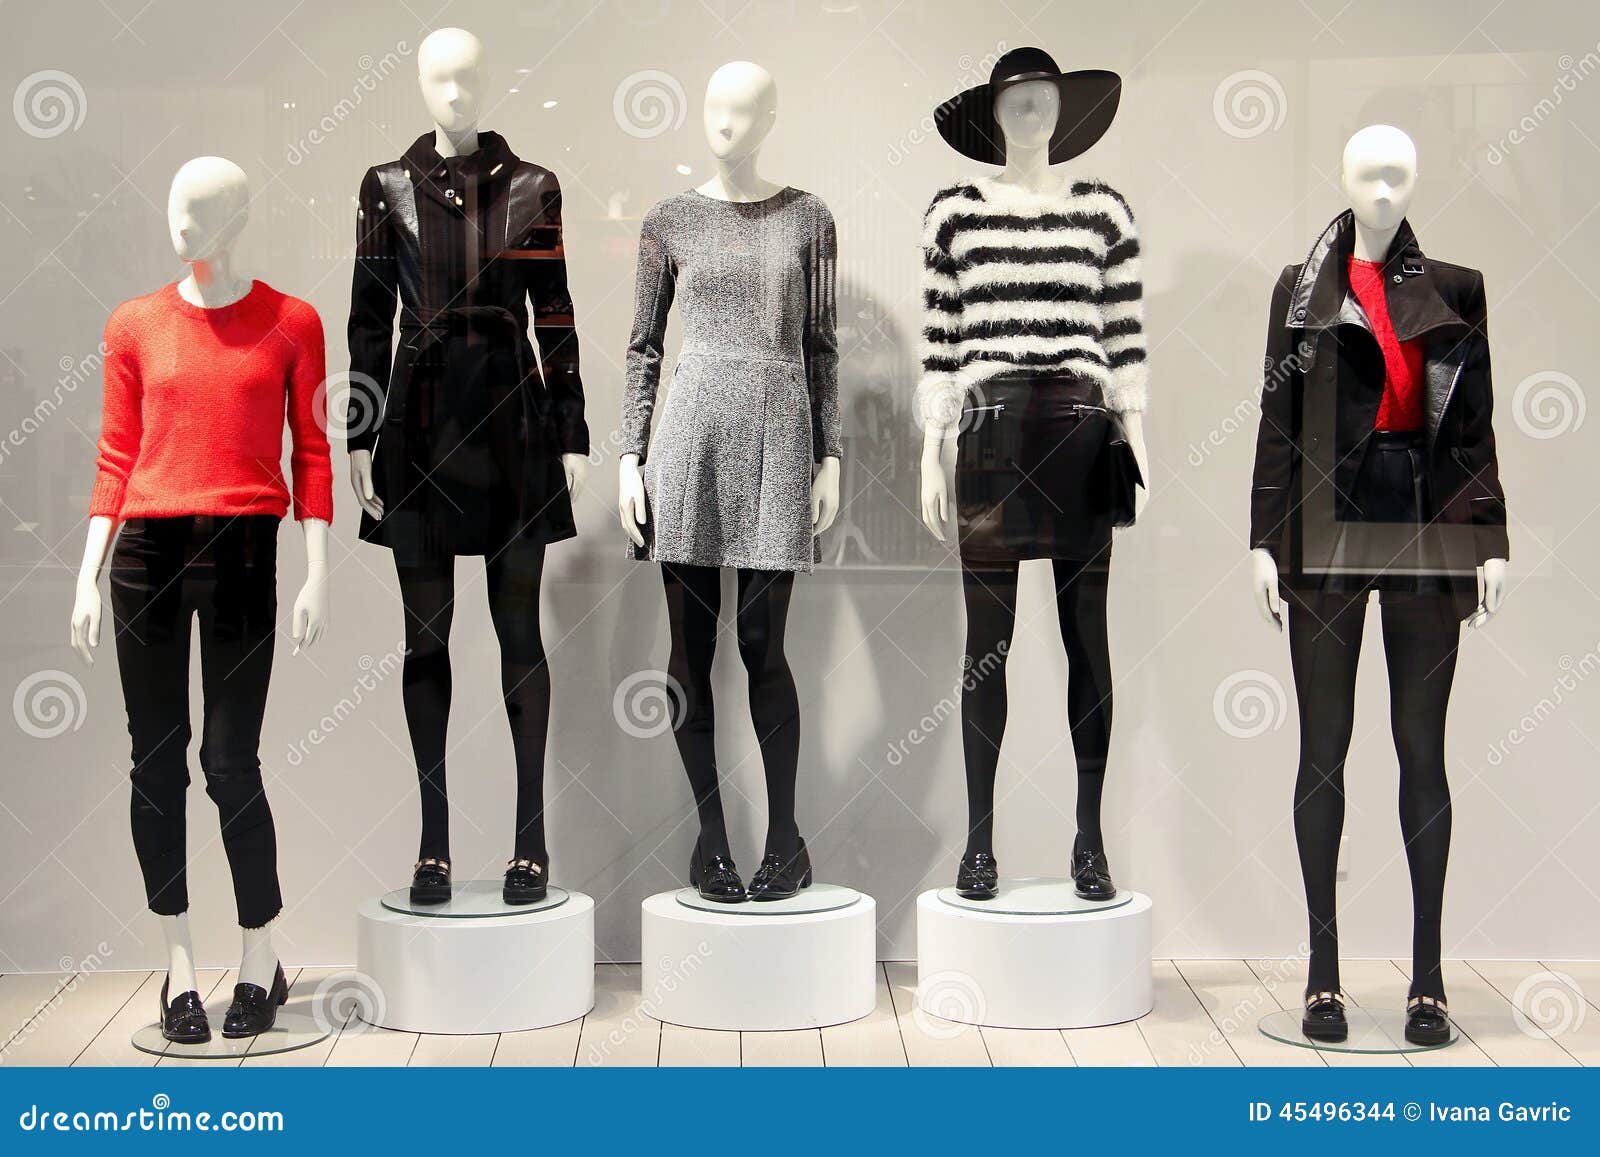 Mannequins in a Clothing Store Stock Photo - Image of fall, coat: 45496344